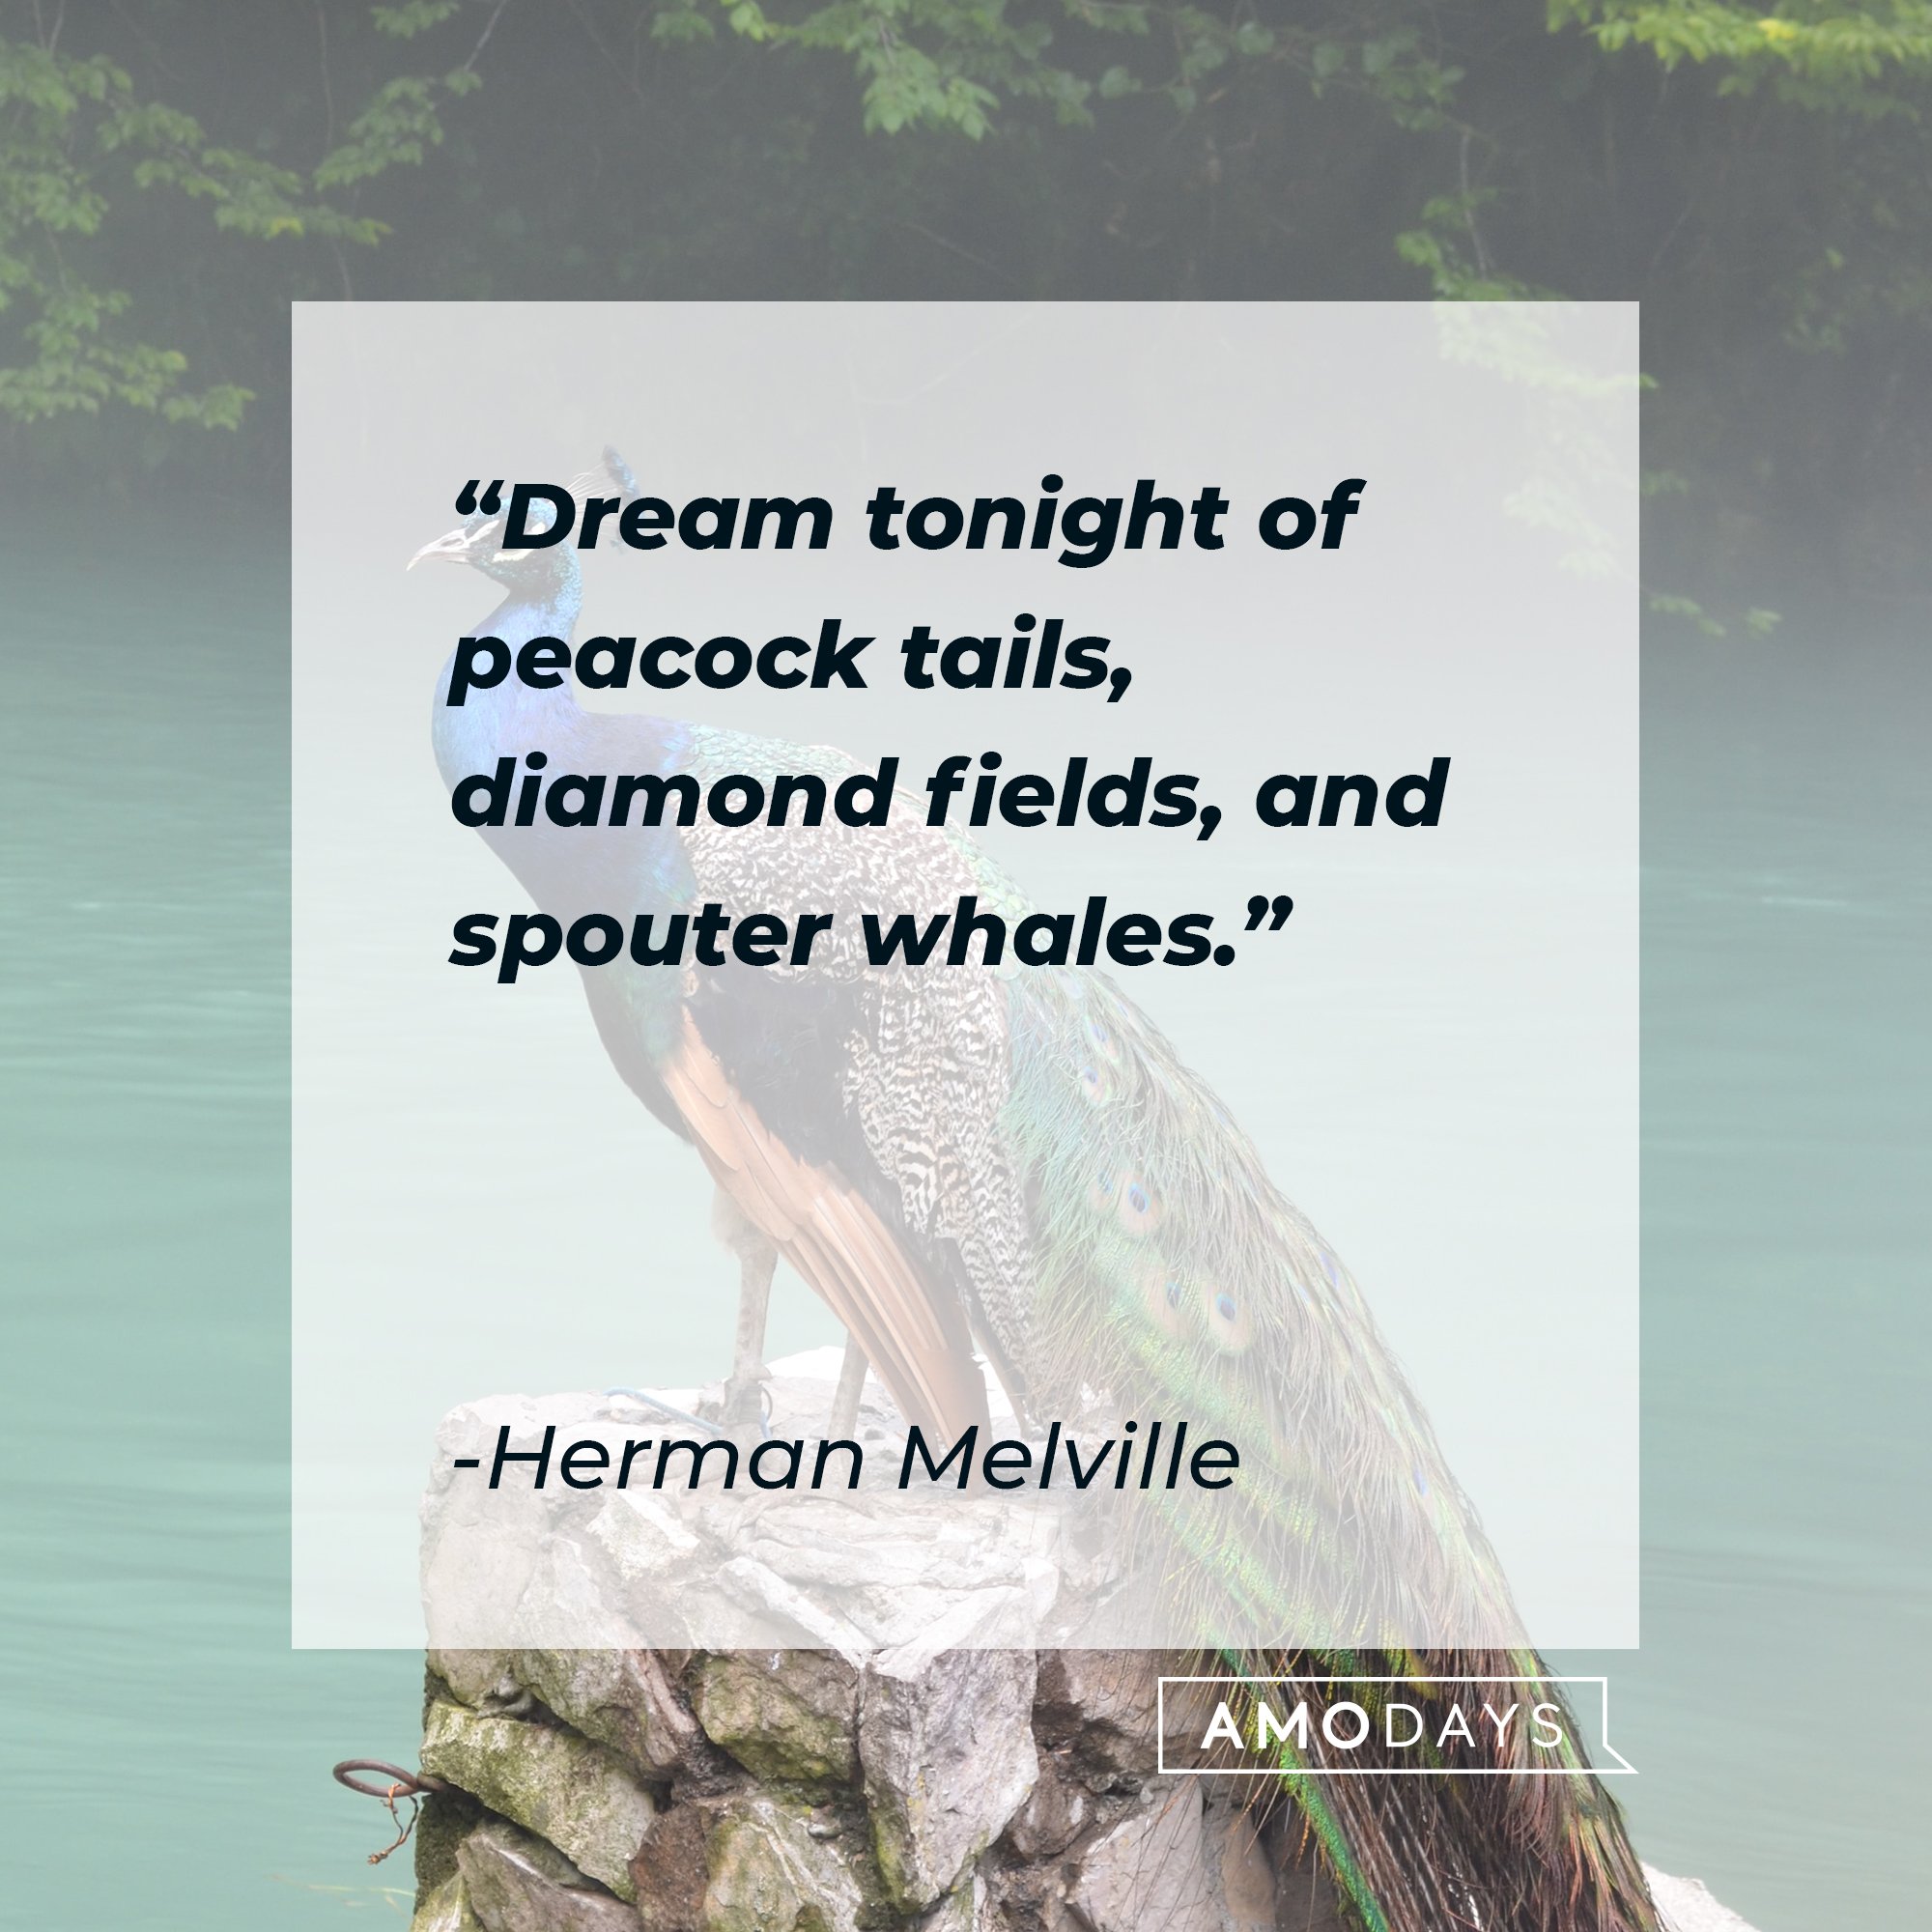 Herman Melville’s quote: "Dream tonight of peacock tails, diamond fields, and spouter whales." | Image: AmoDays